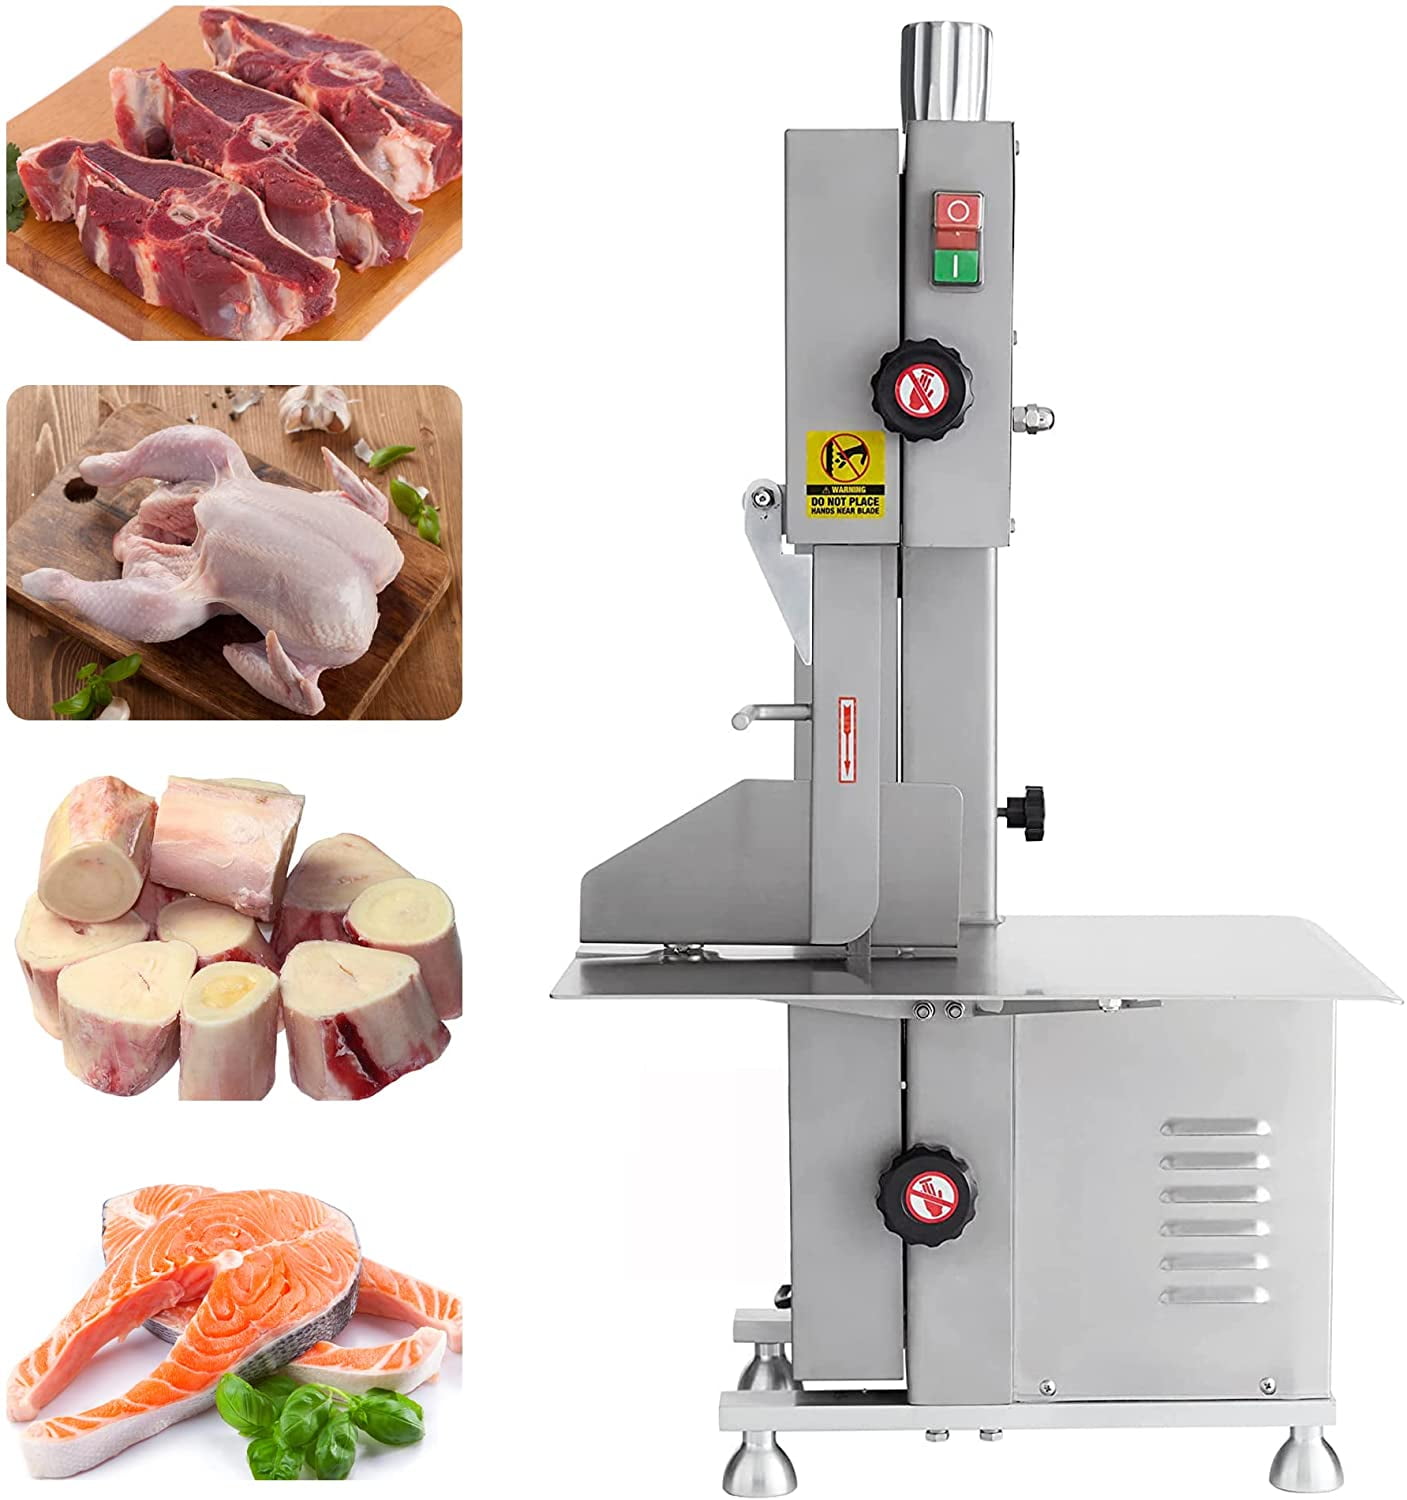 Hakka Commercial 10L Multifunction Meat Bowl Cutter Mixer and